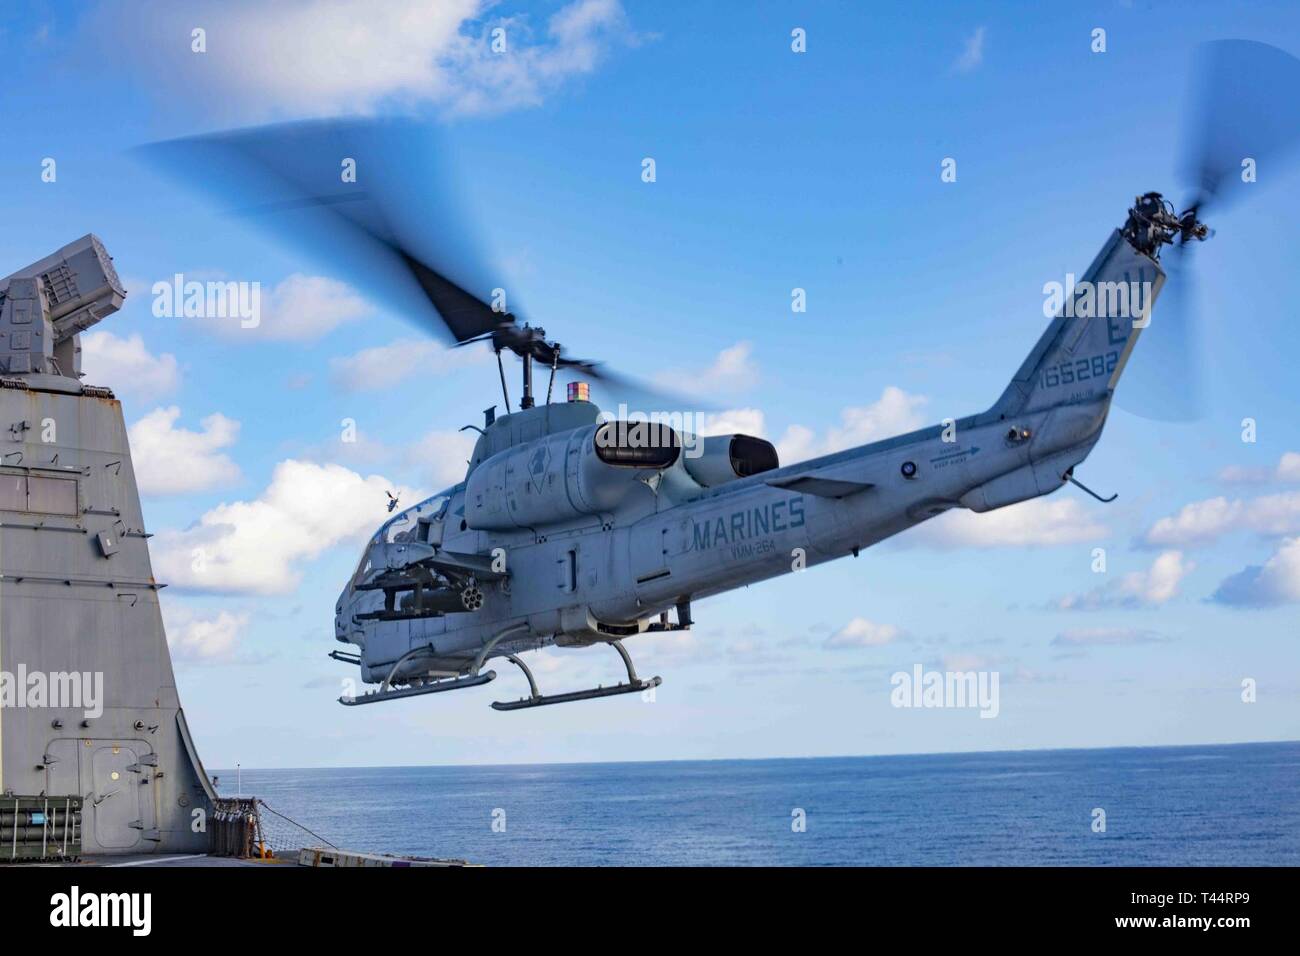 MEDITERRANEAN SEA (Feb. 21, 2019) An AH-1W Super Cobra helicopter assigned to the “Black Knights” of Marine Medium Tiltrotor Squadron (VMM) 264 (Reinforced) departs the flight deck of the San Antonio-class amphibious transport dock ship USS Arlington (LPD 24), Feb. 21, 2019. Arlington is on a scheduled deployment as part of the Kearsarge Amphibious Ready Group in support of maritime security operations, crisis response and theater security cooperation, while also providing a forward naval presence. Stock Photo